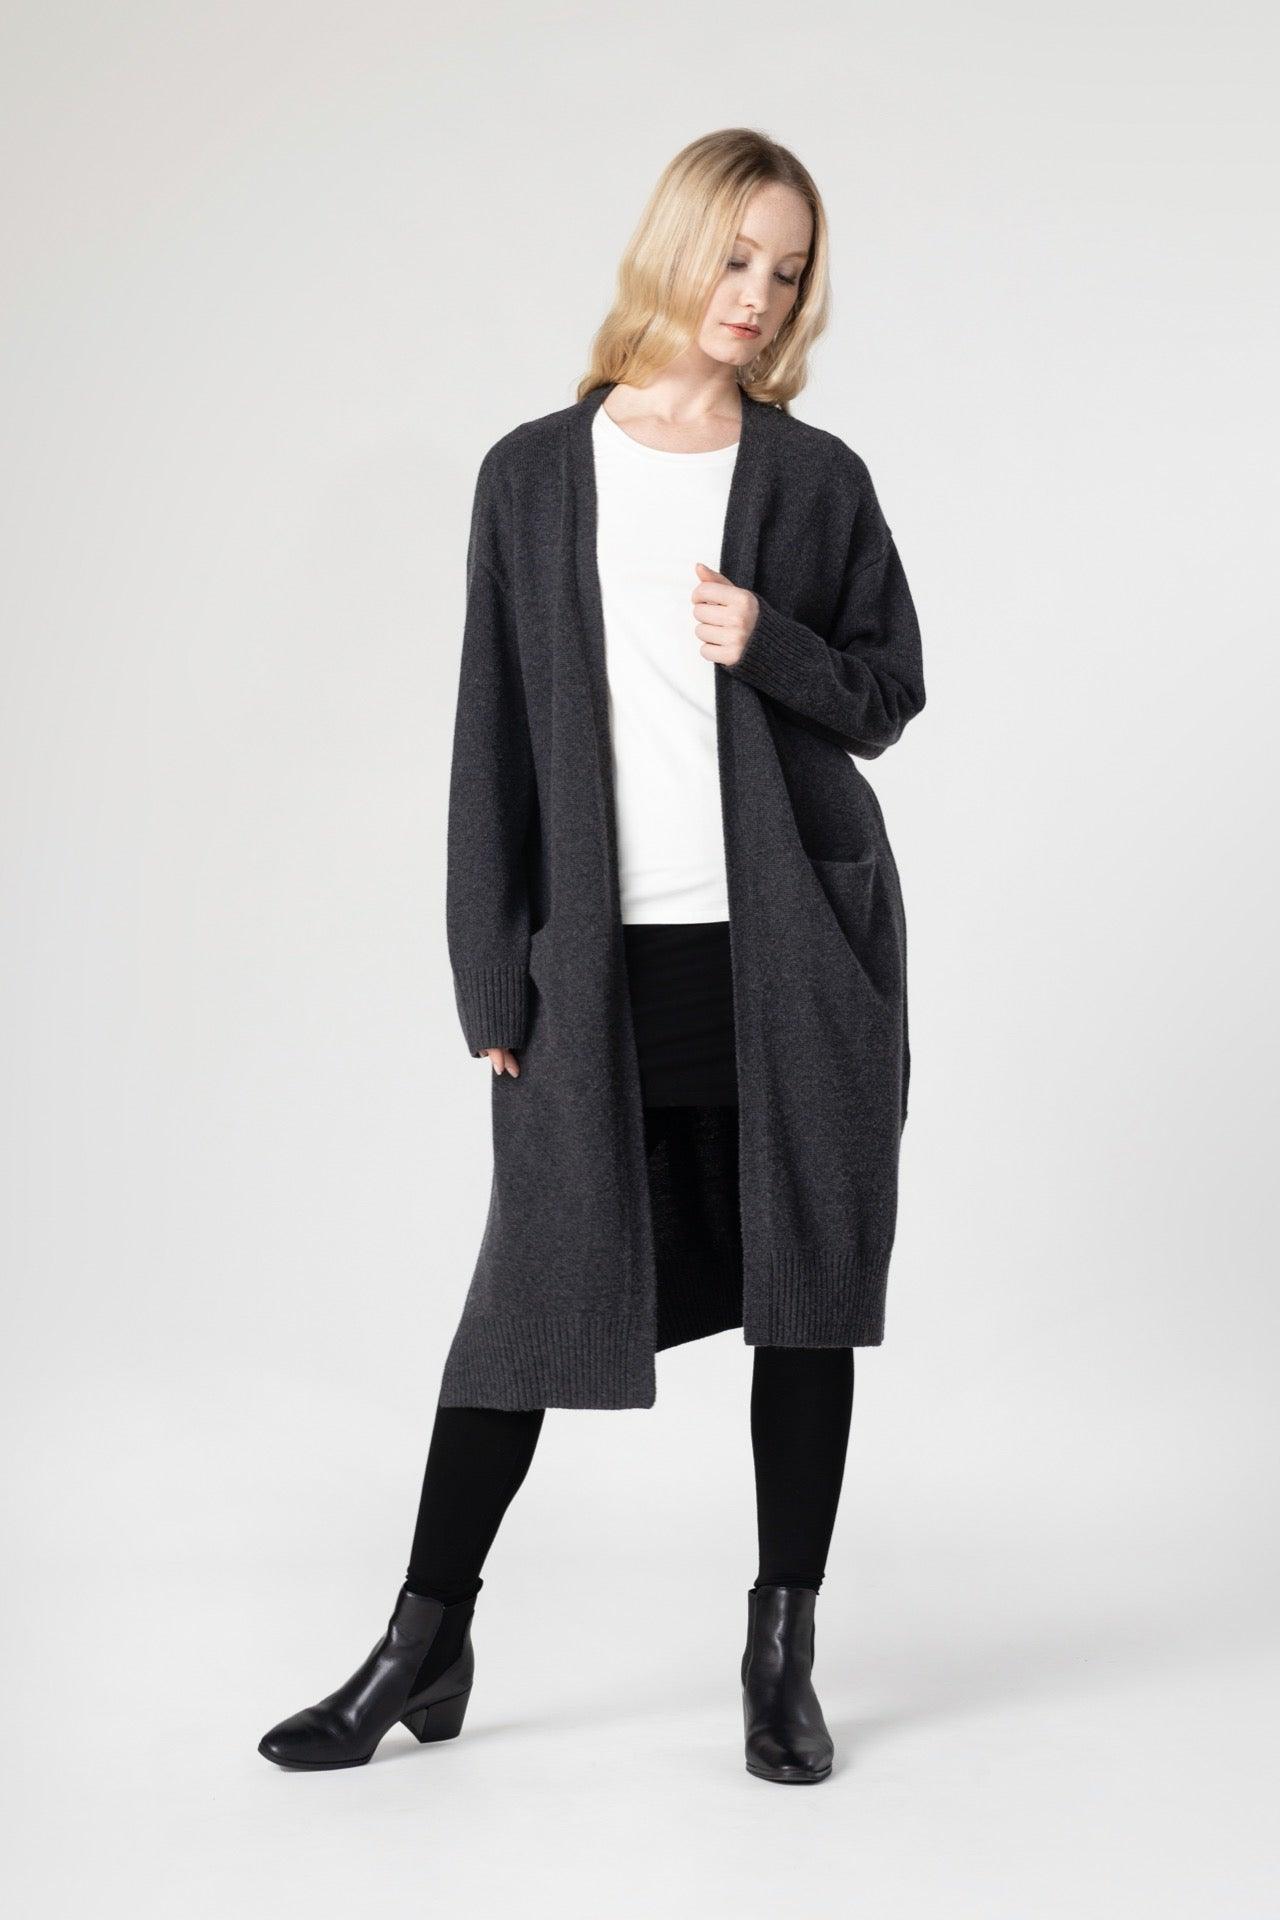 Women's Light Weight Side Slit Long Cardigan - NOT LABELED